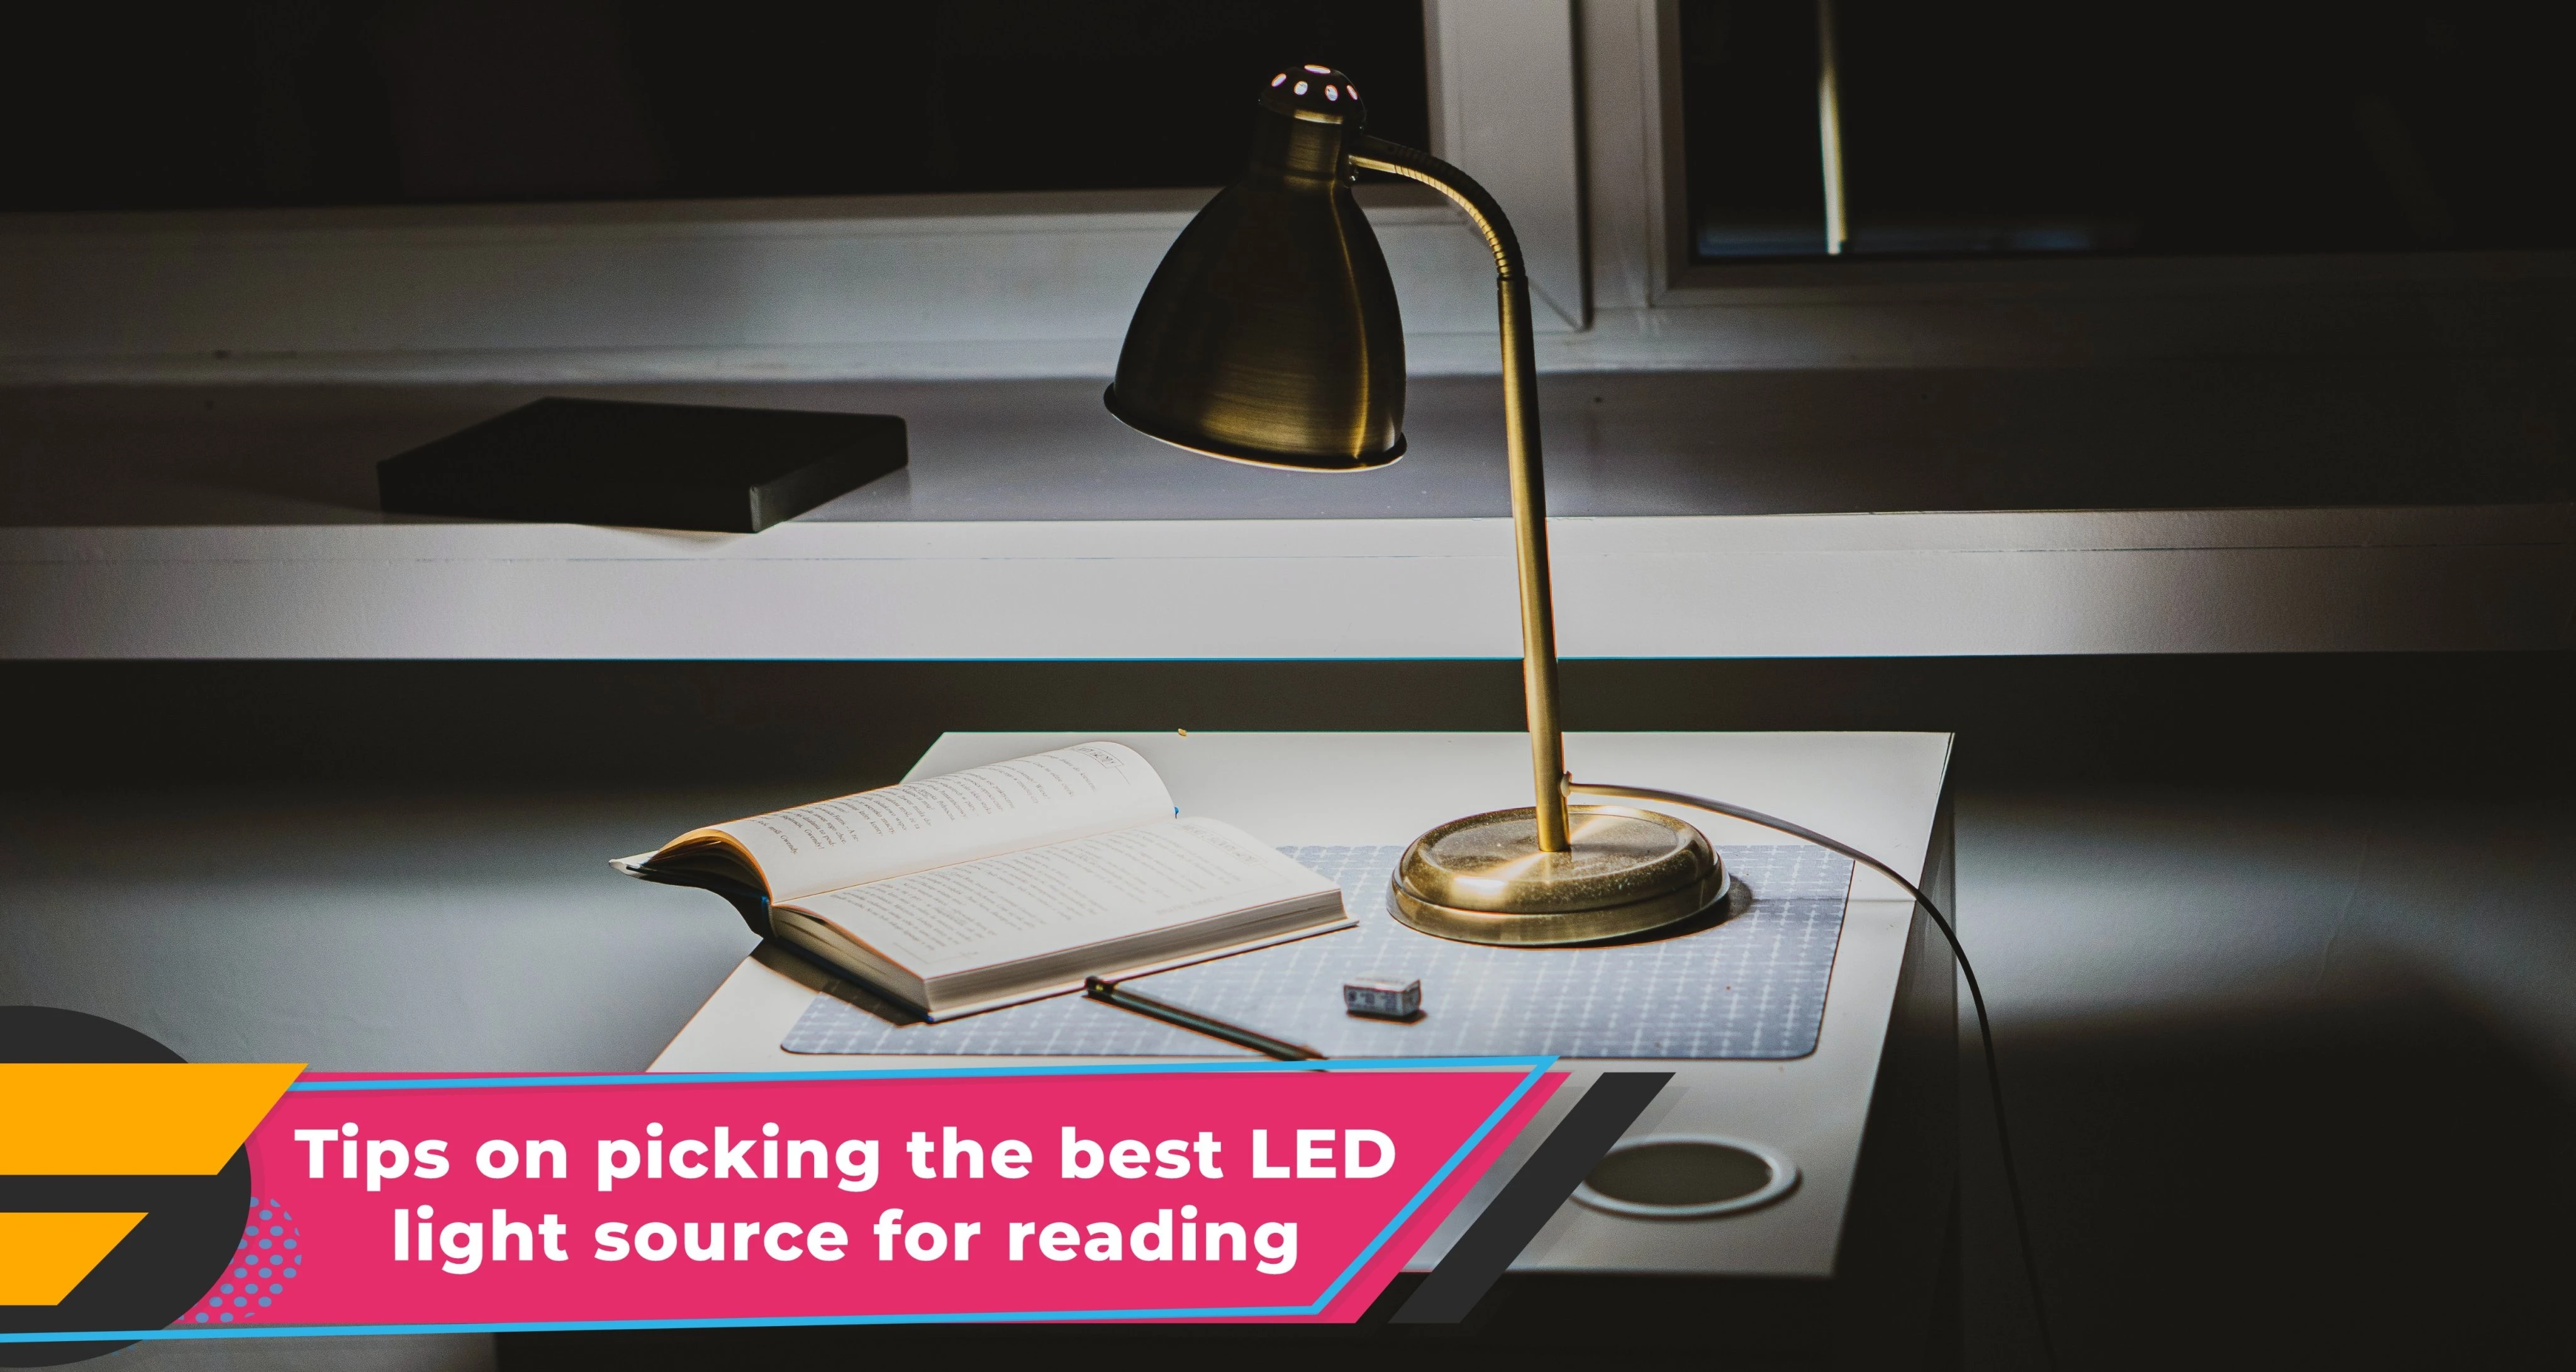 Tips on picking the best LED light source for reading